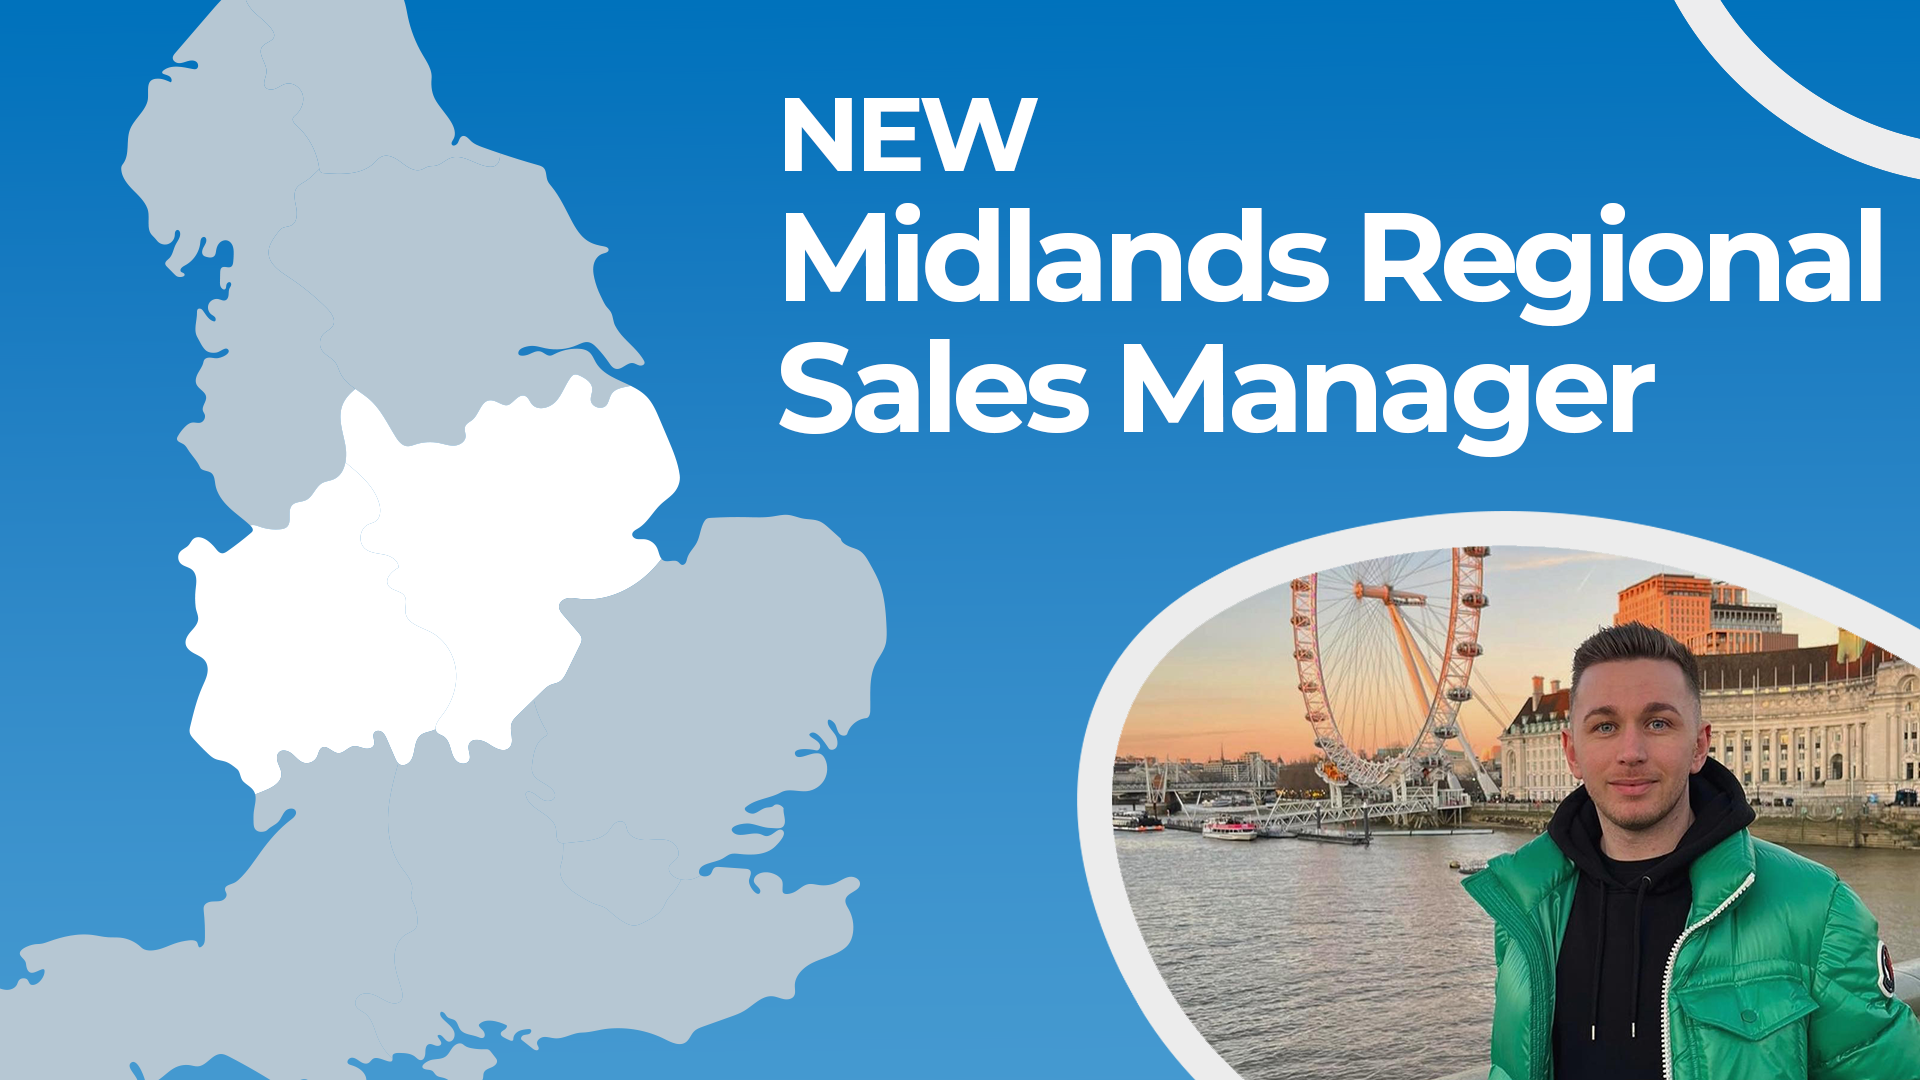 Meet Michael: The New Regional Sales Manager for the Midlands